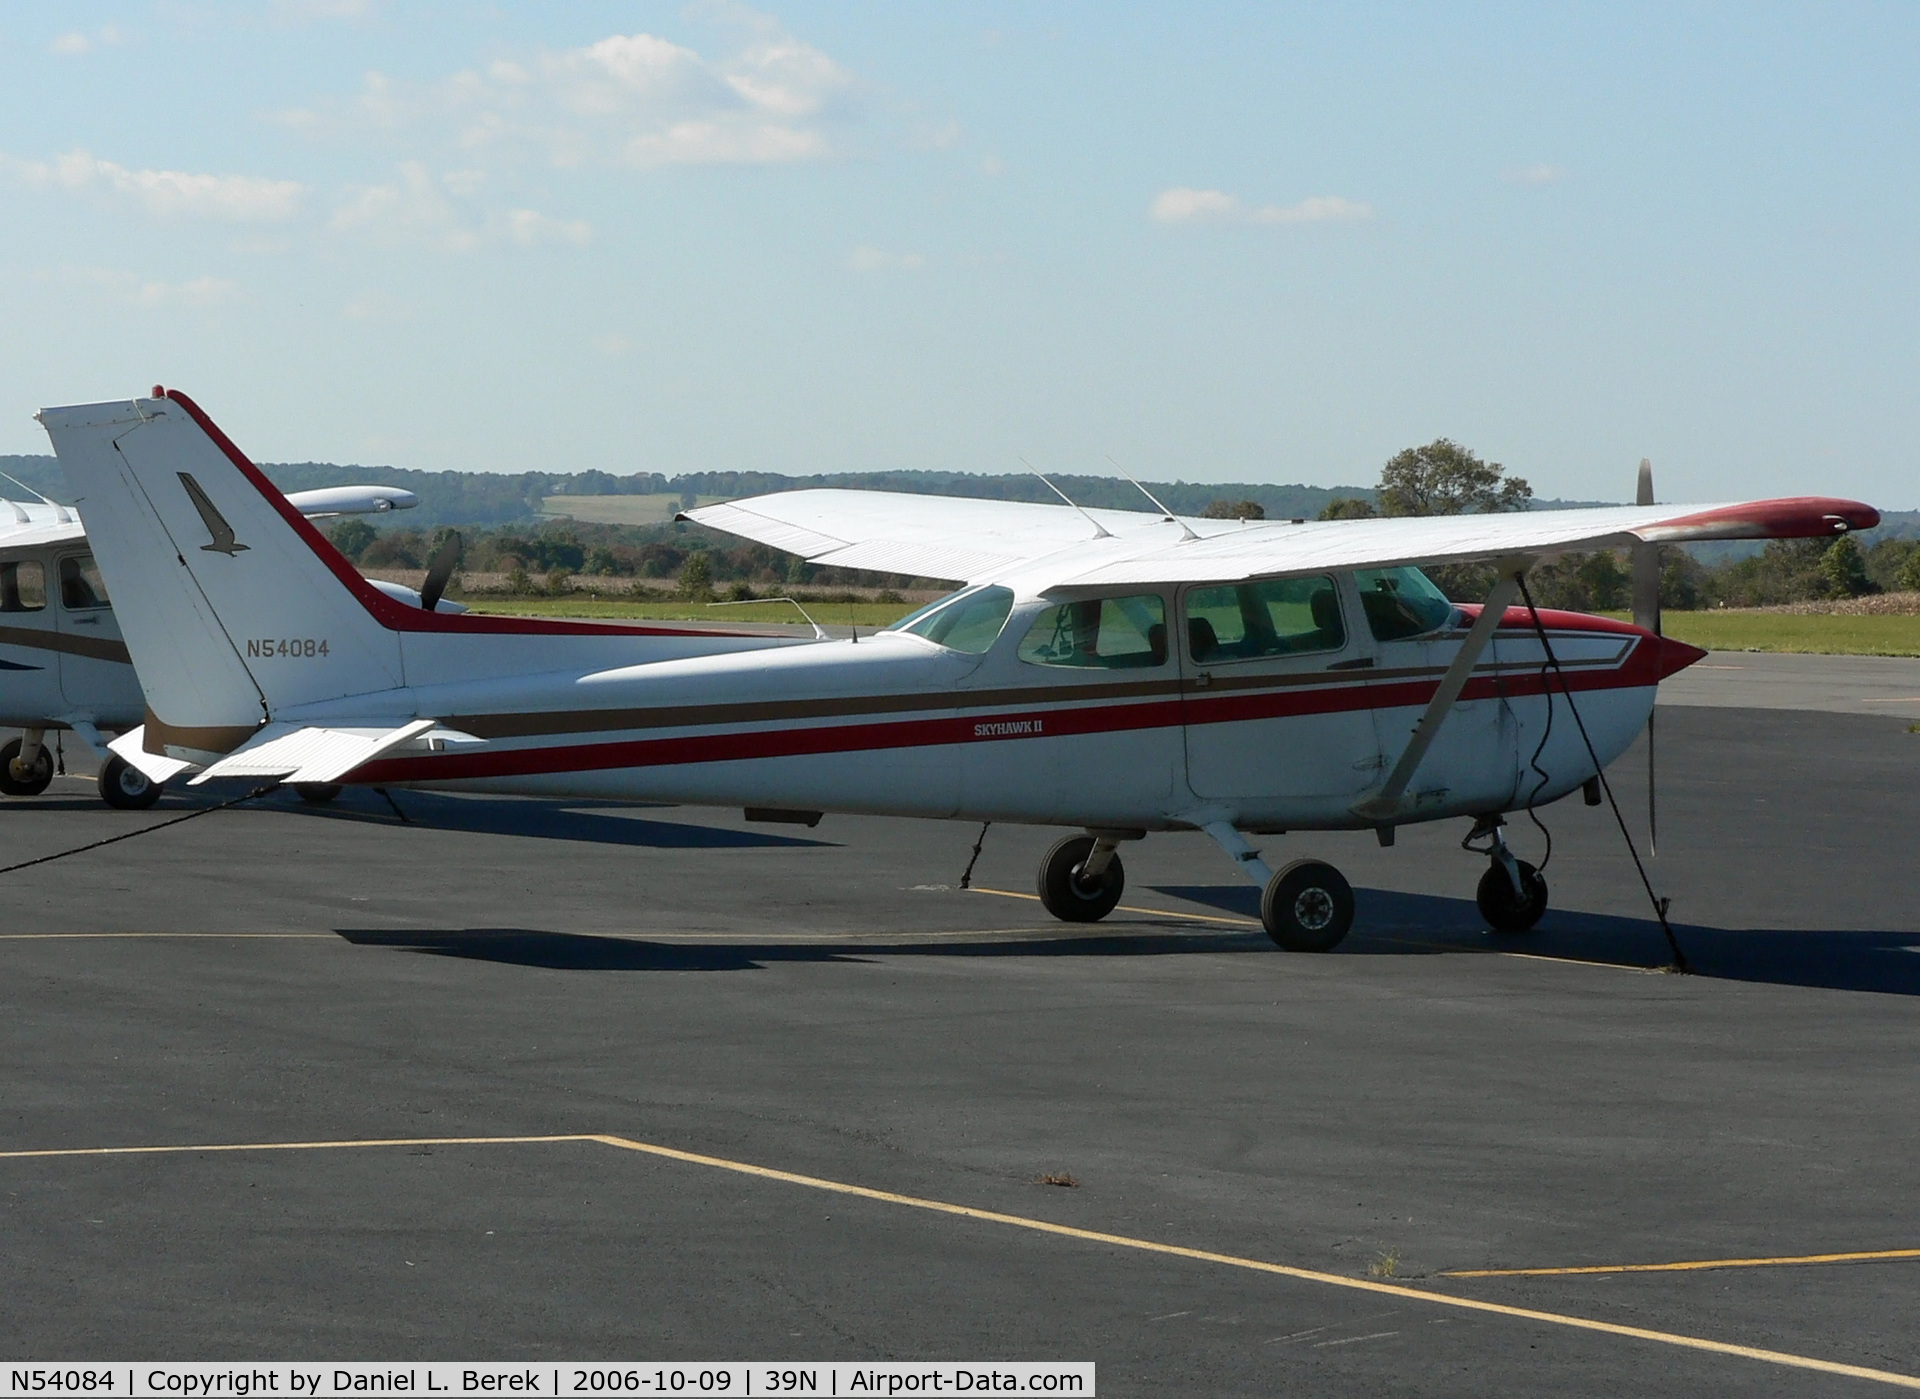 N54084, 1981 Cessna 172P C/N 17274870, Training Skyhawk rests on the ramp at Princeton Airport